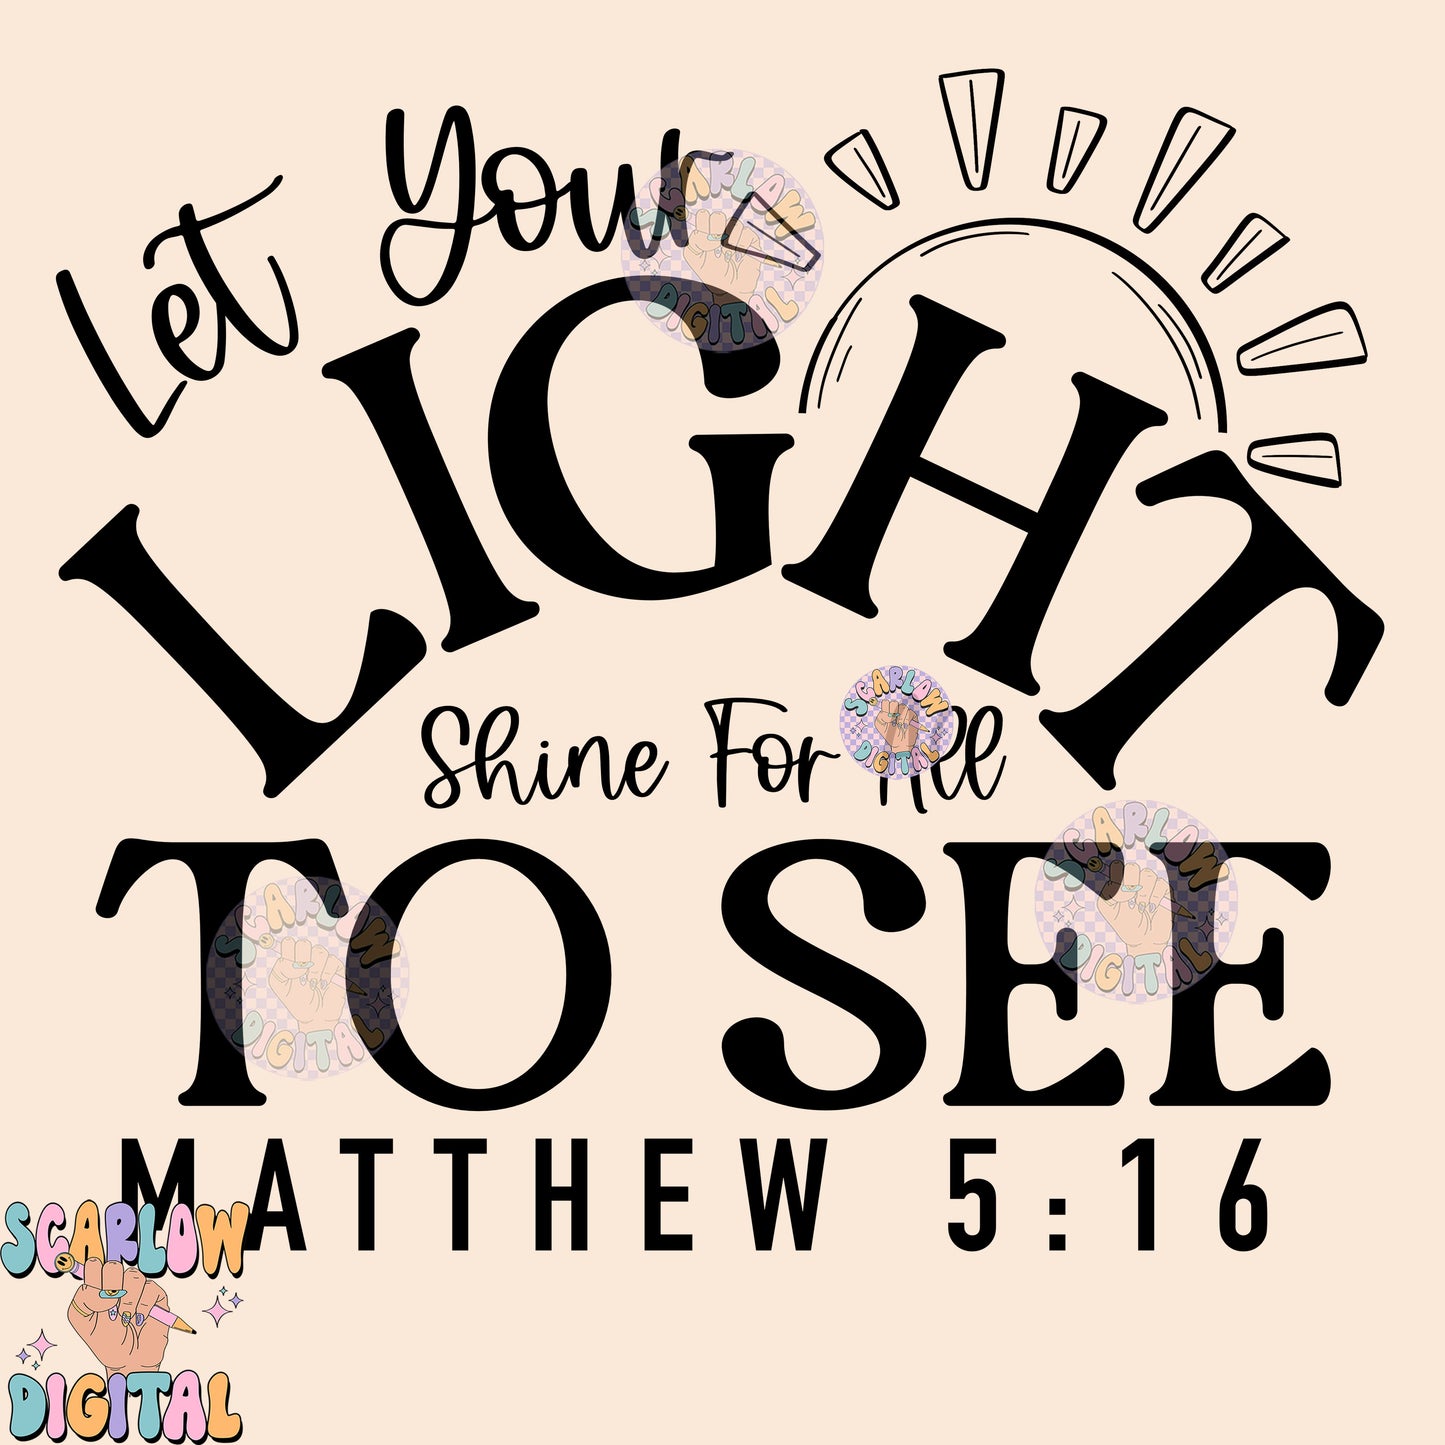 Let Your Light Shine For All to See PNG Digital Design Download, matthew 5:16 png, christian png, bible verse png, sunshine png, happy png